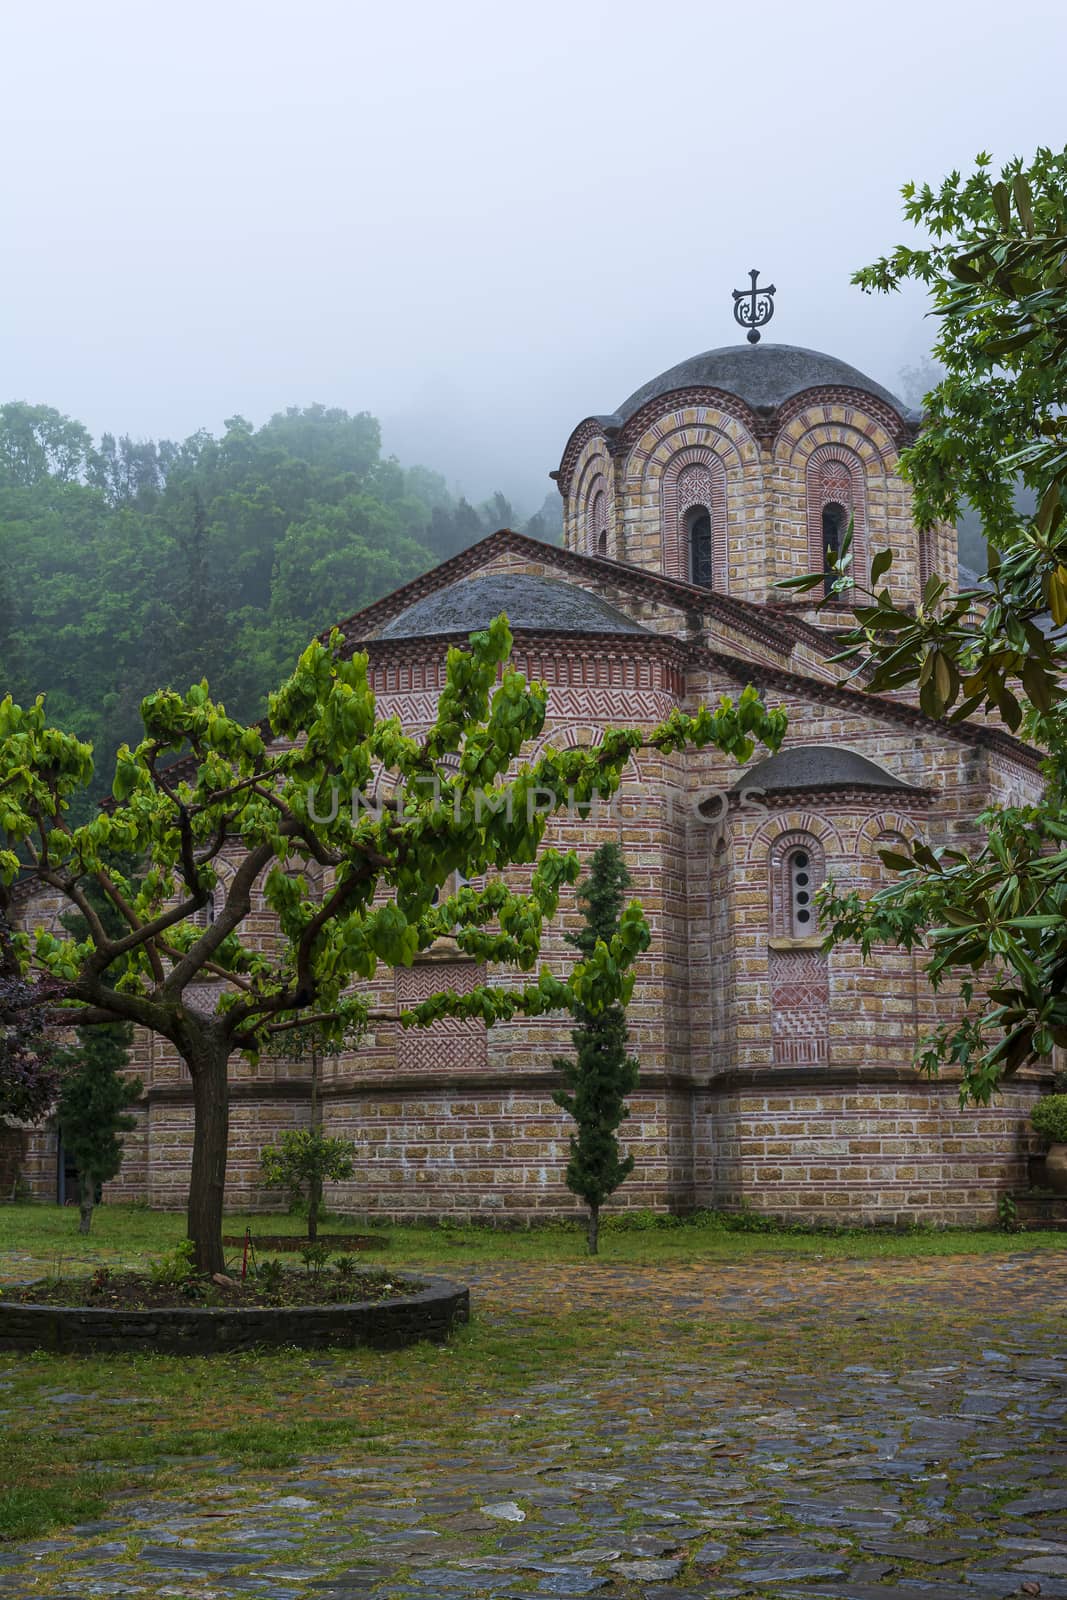 The Holy Patriarchal Monastery of Saint Dionysios of Olympus is the most important monastery in the prefecture of Pieria.